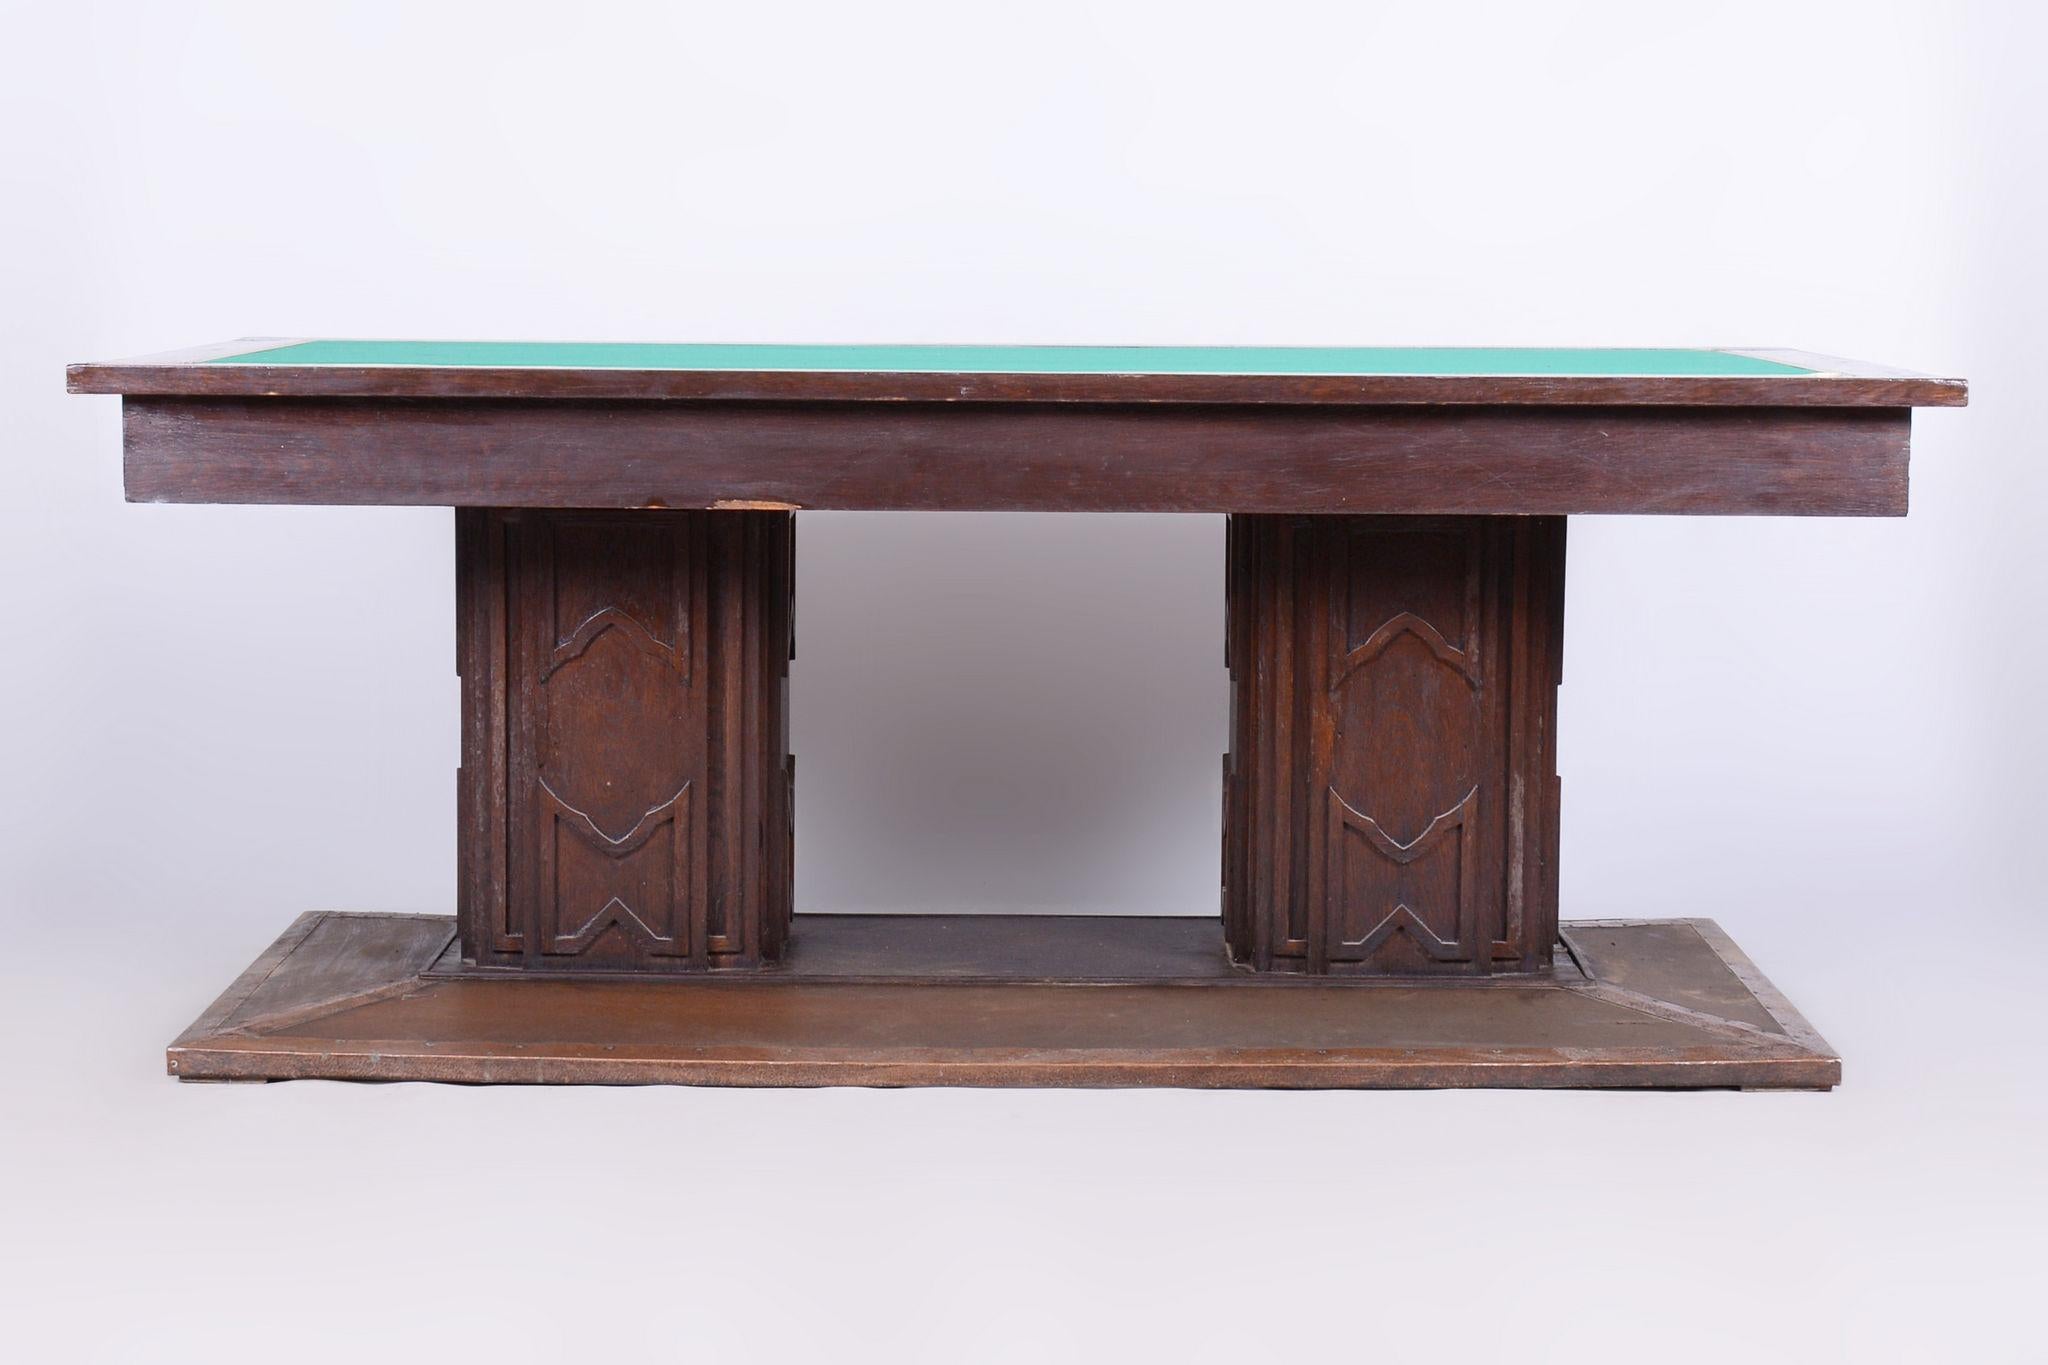 Restored Art Deco Dining Table, Oak, Copper Plating, Glass, Czech, 1930s In Good Condition For Sale In Horomerice, CZ